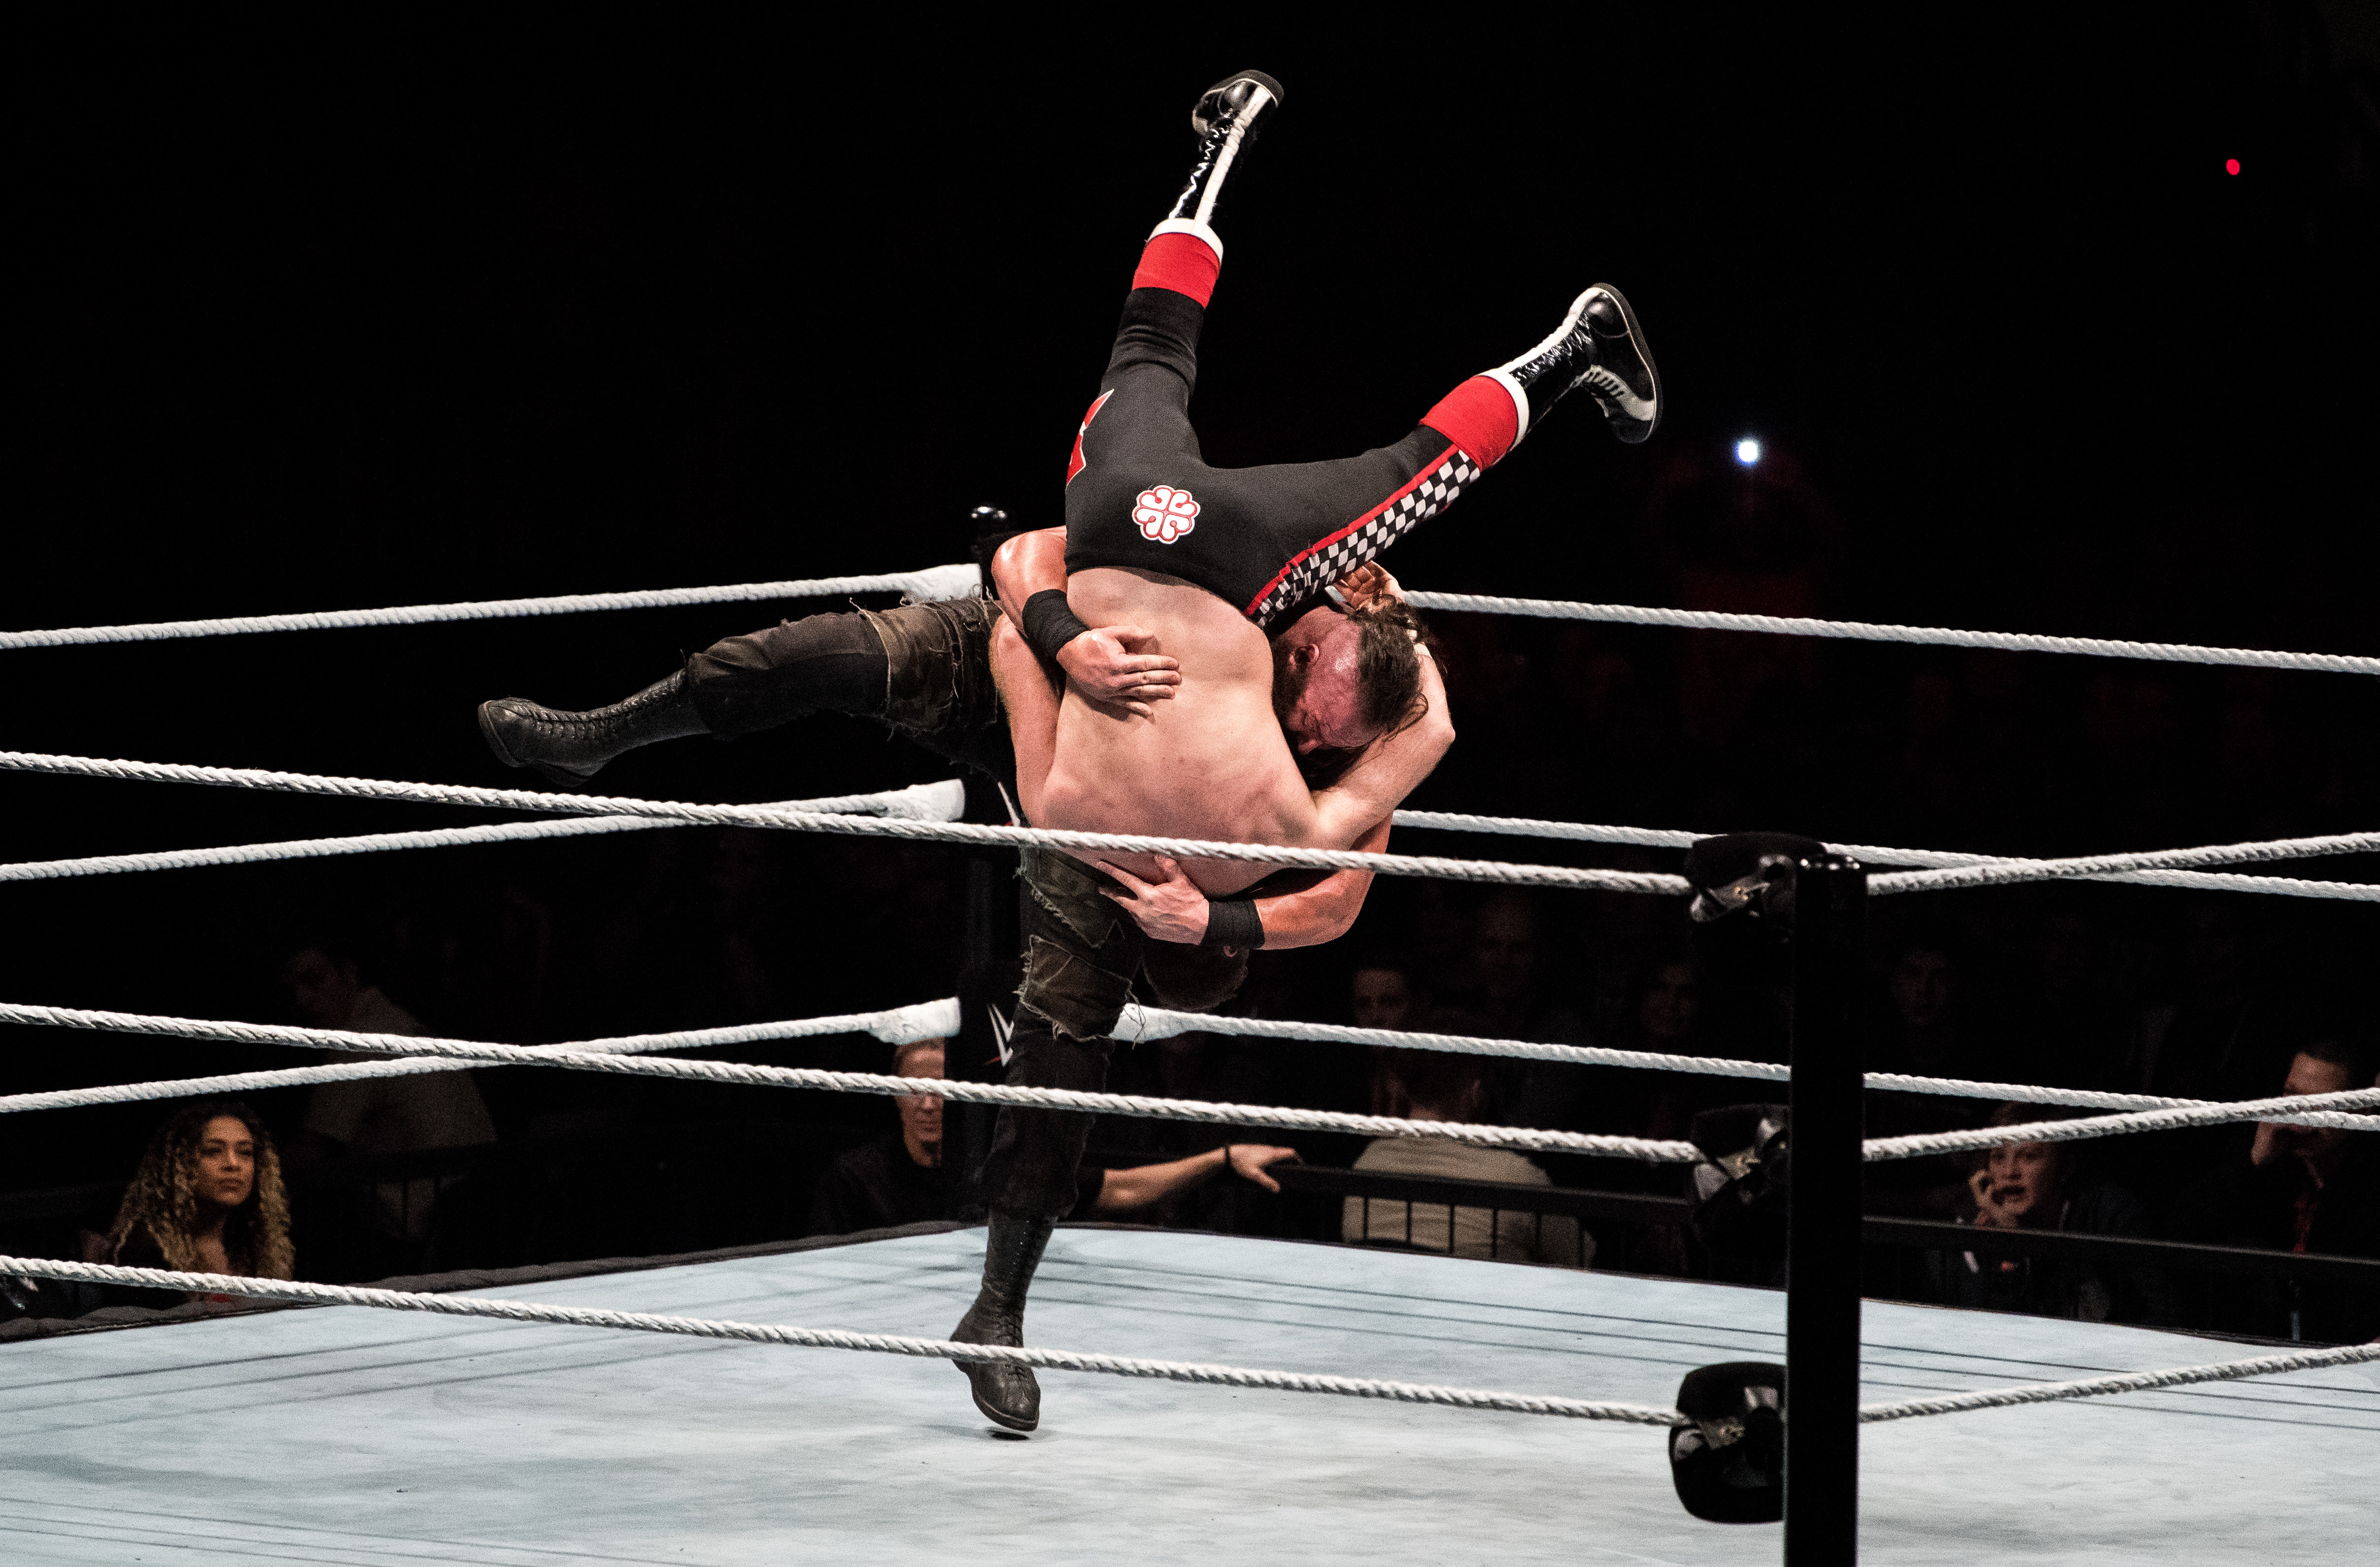 DUESSELDORF, GERMANY - FEBRUARY 22: Braun Strowman (R) fights against Sami Zayn (L) during to the WWE Live Duesseldorf event at ISS Dome on February 22, 2017 in Duesseldorf, Germany. (Photo by Lukas Schulze/Bongarts/Getty Images)